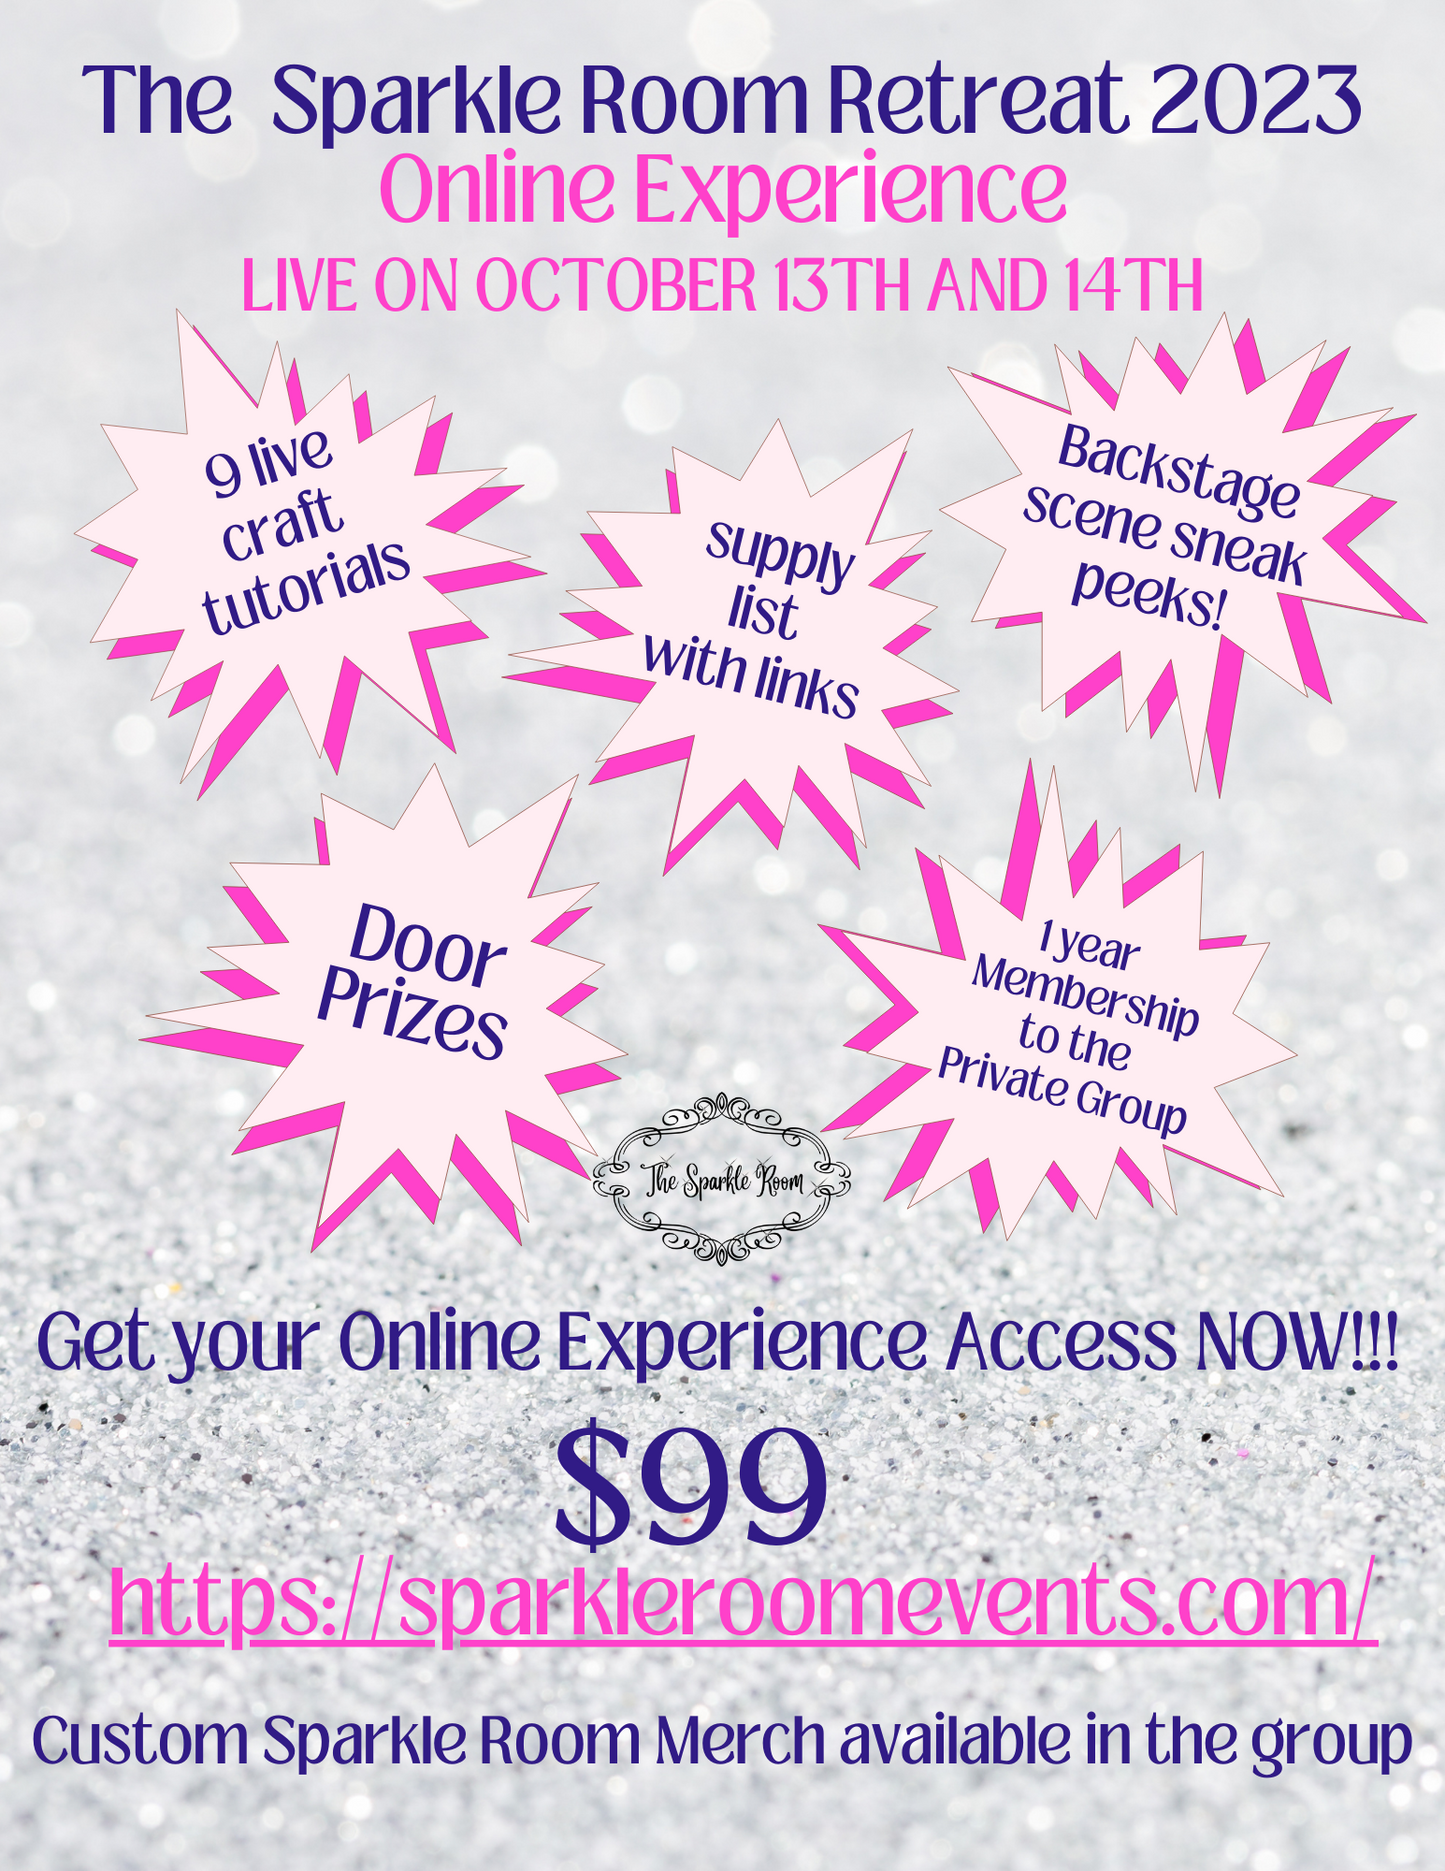 The Sparkle Room Retreat 2023 Online Experience